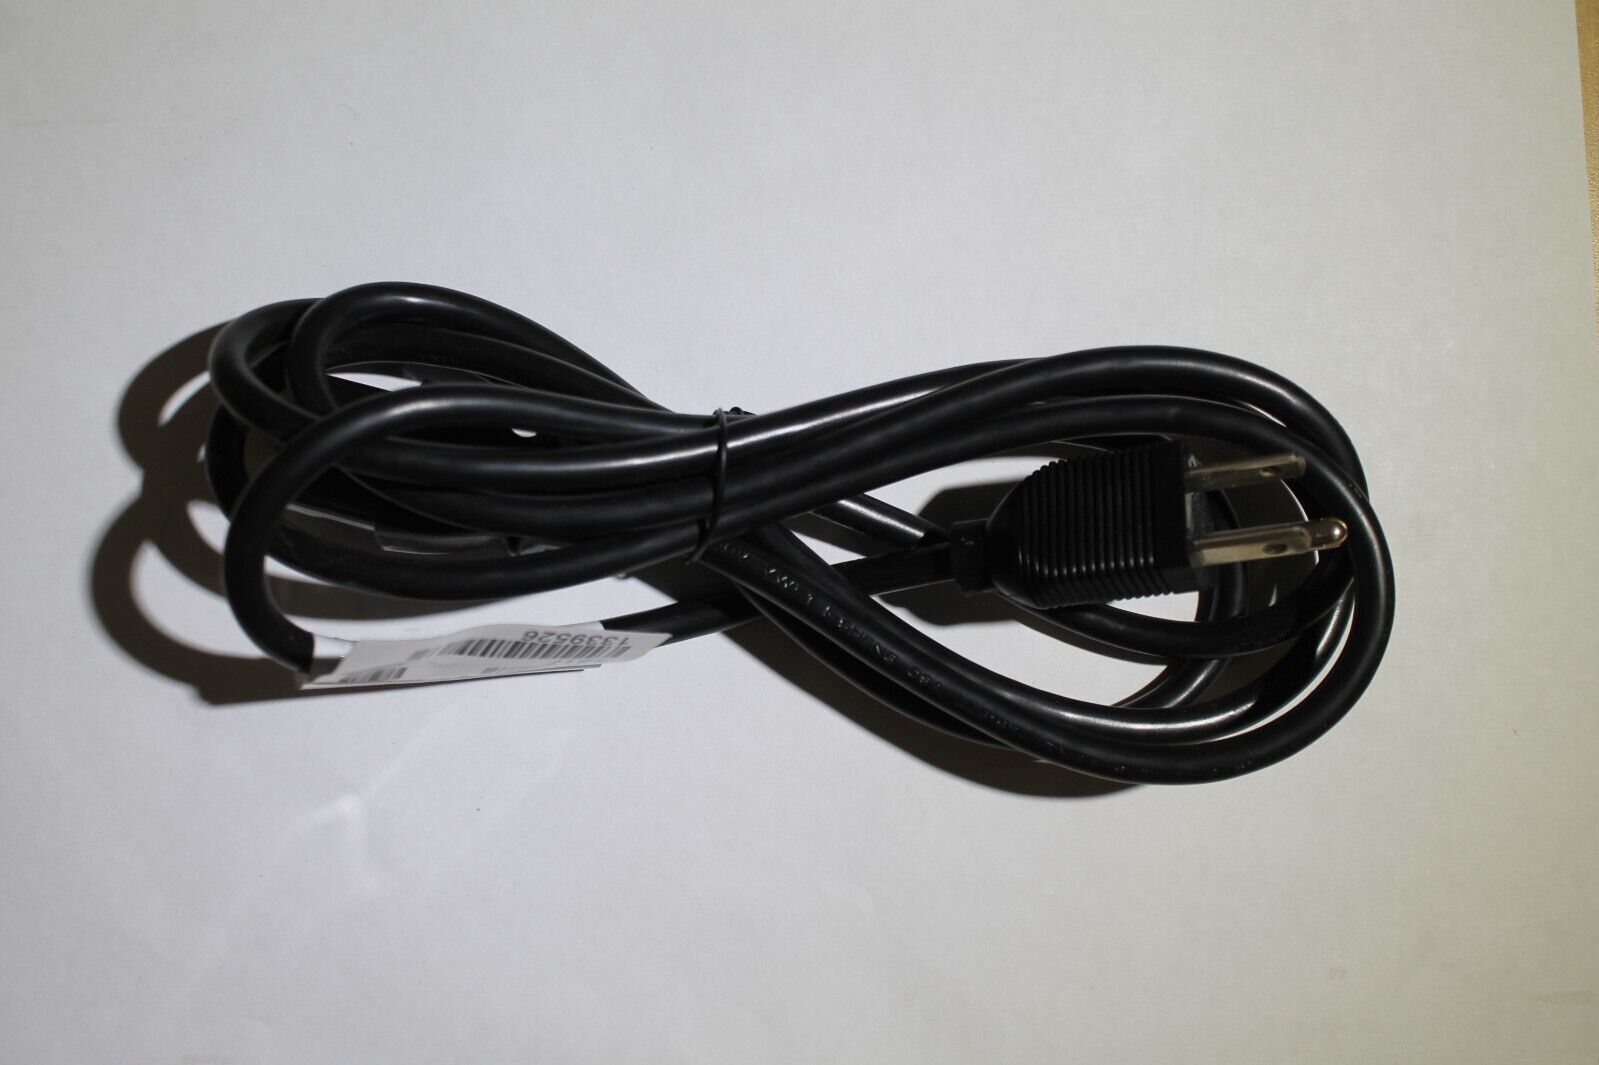 I-SHENG IS-14 10A 125V 1250W Power Cord Cable E55943 LL41230 SP-305 - 6'